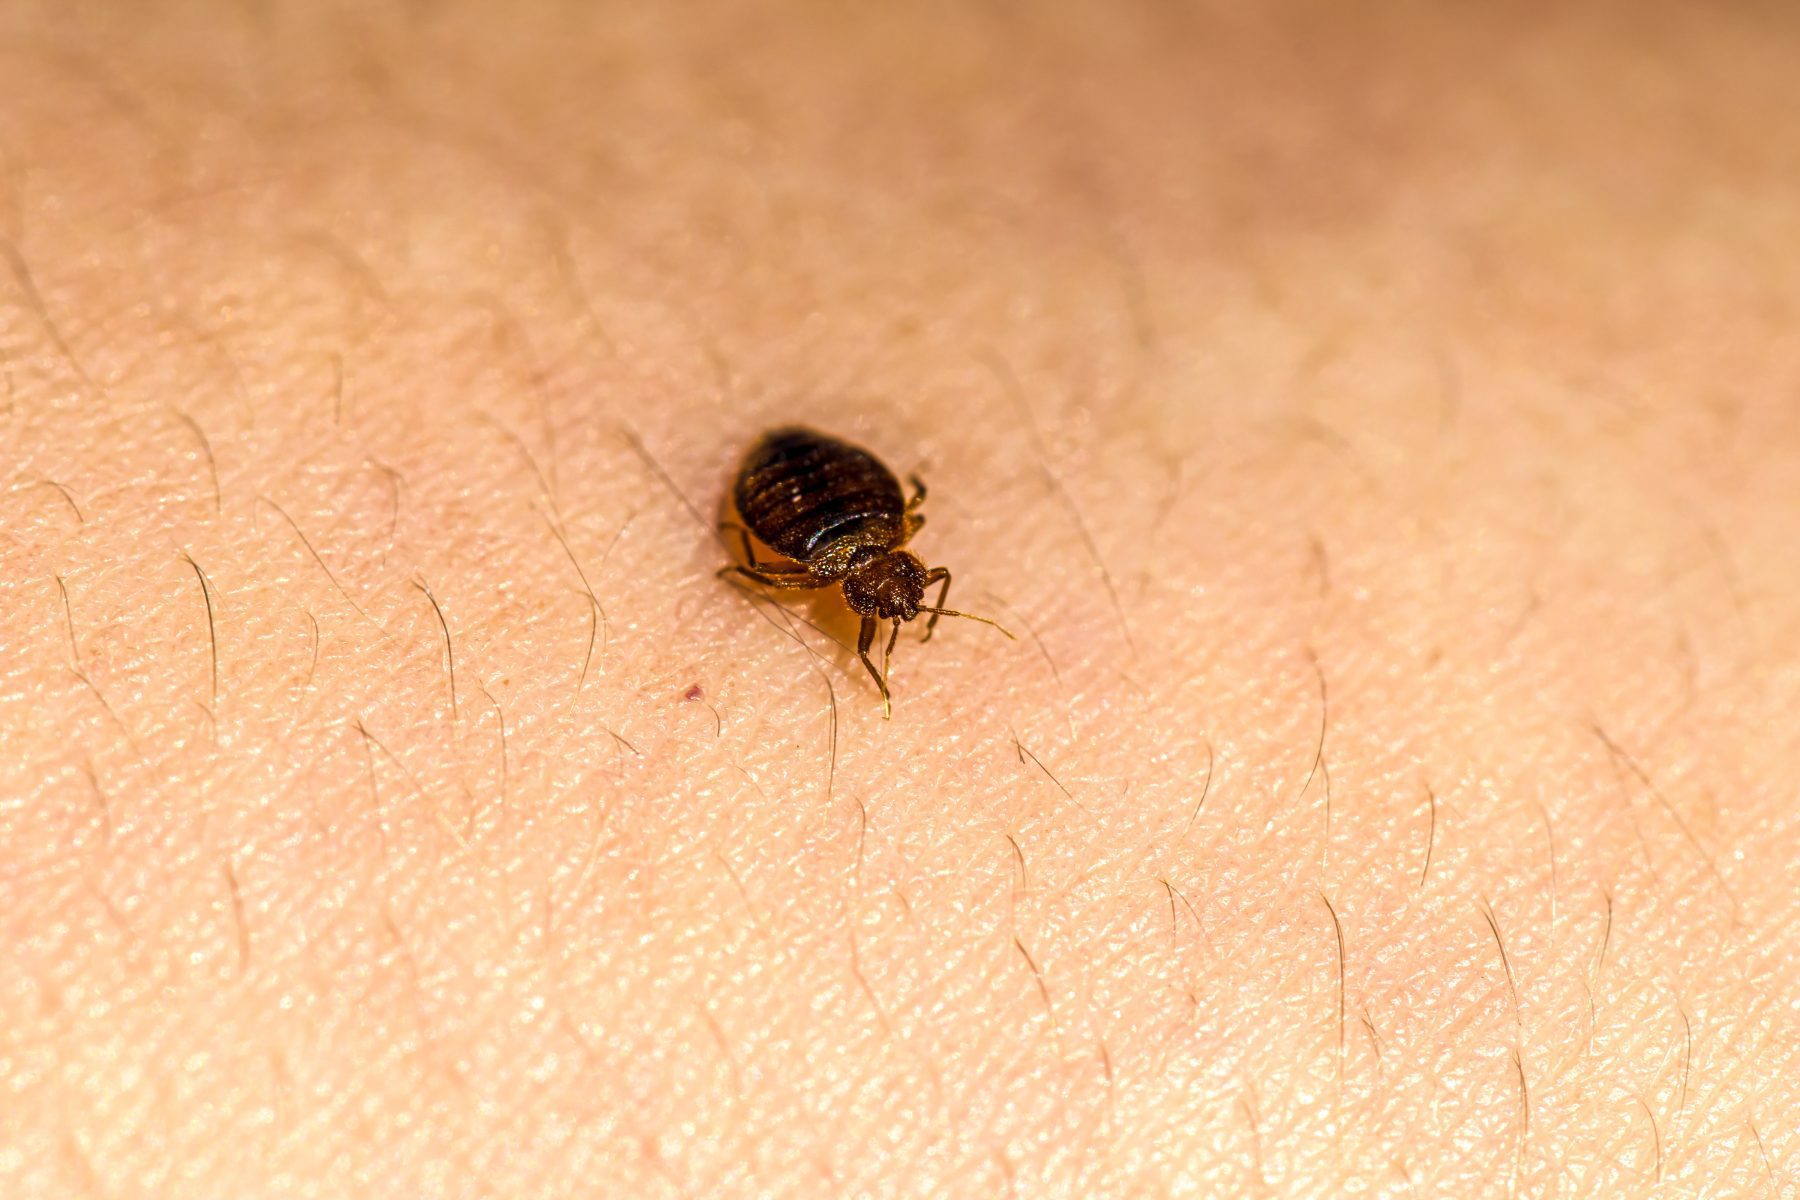 Closeup of bed bug on skin.